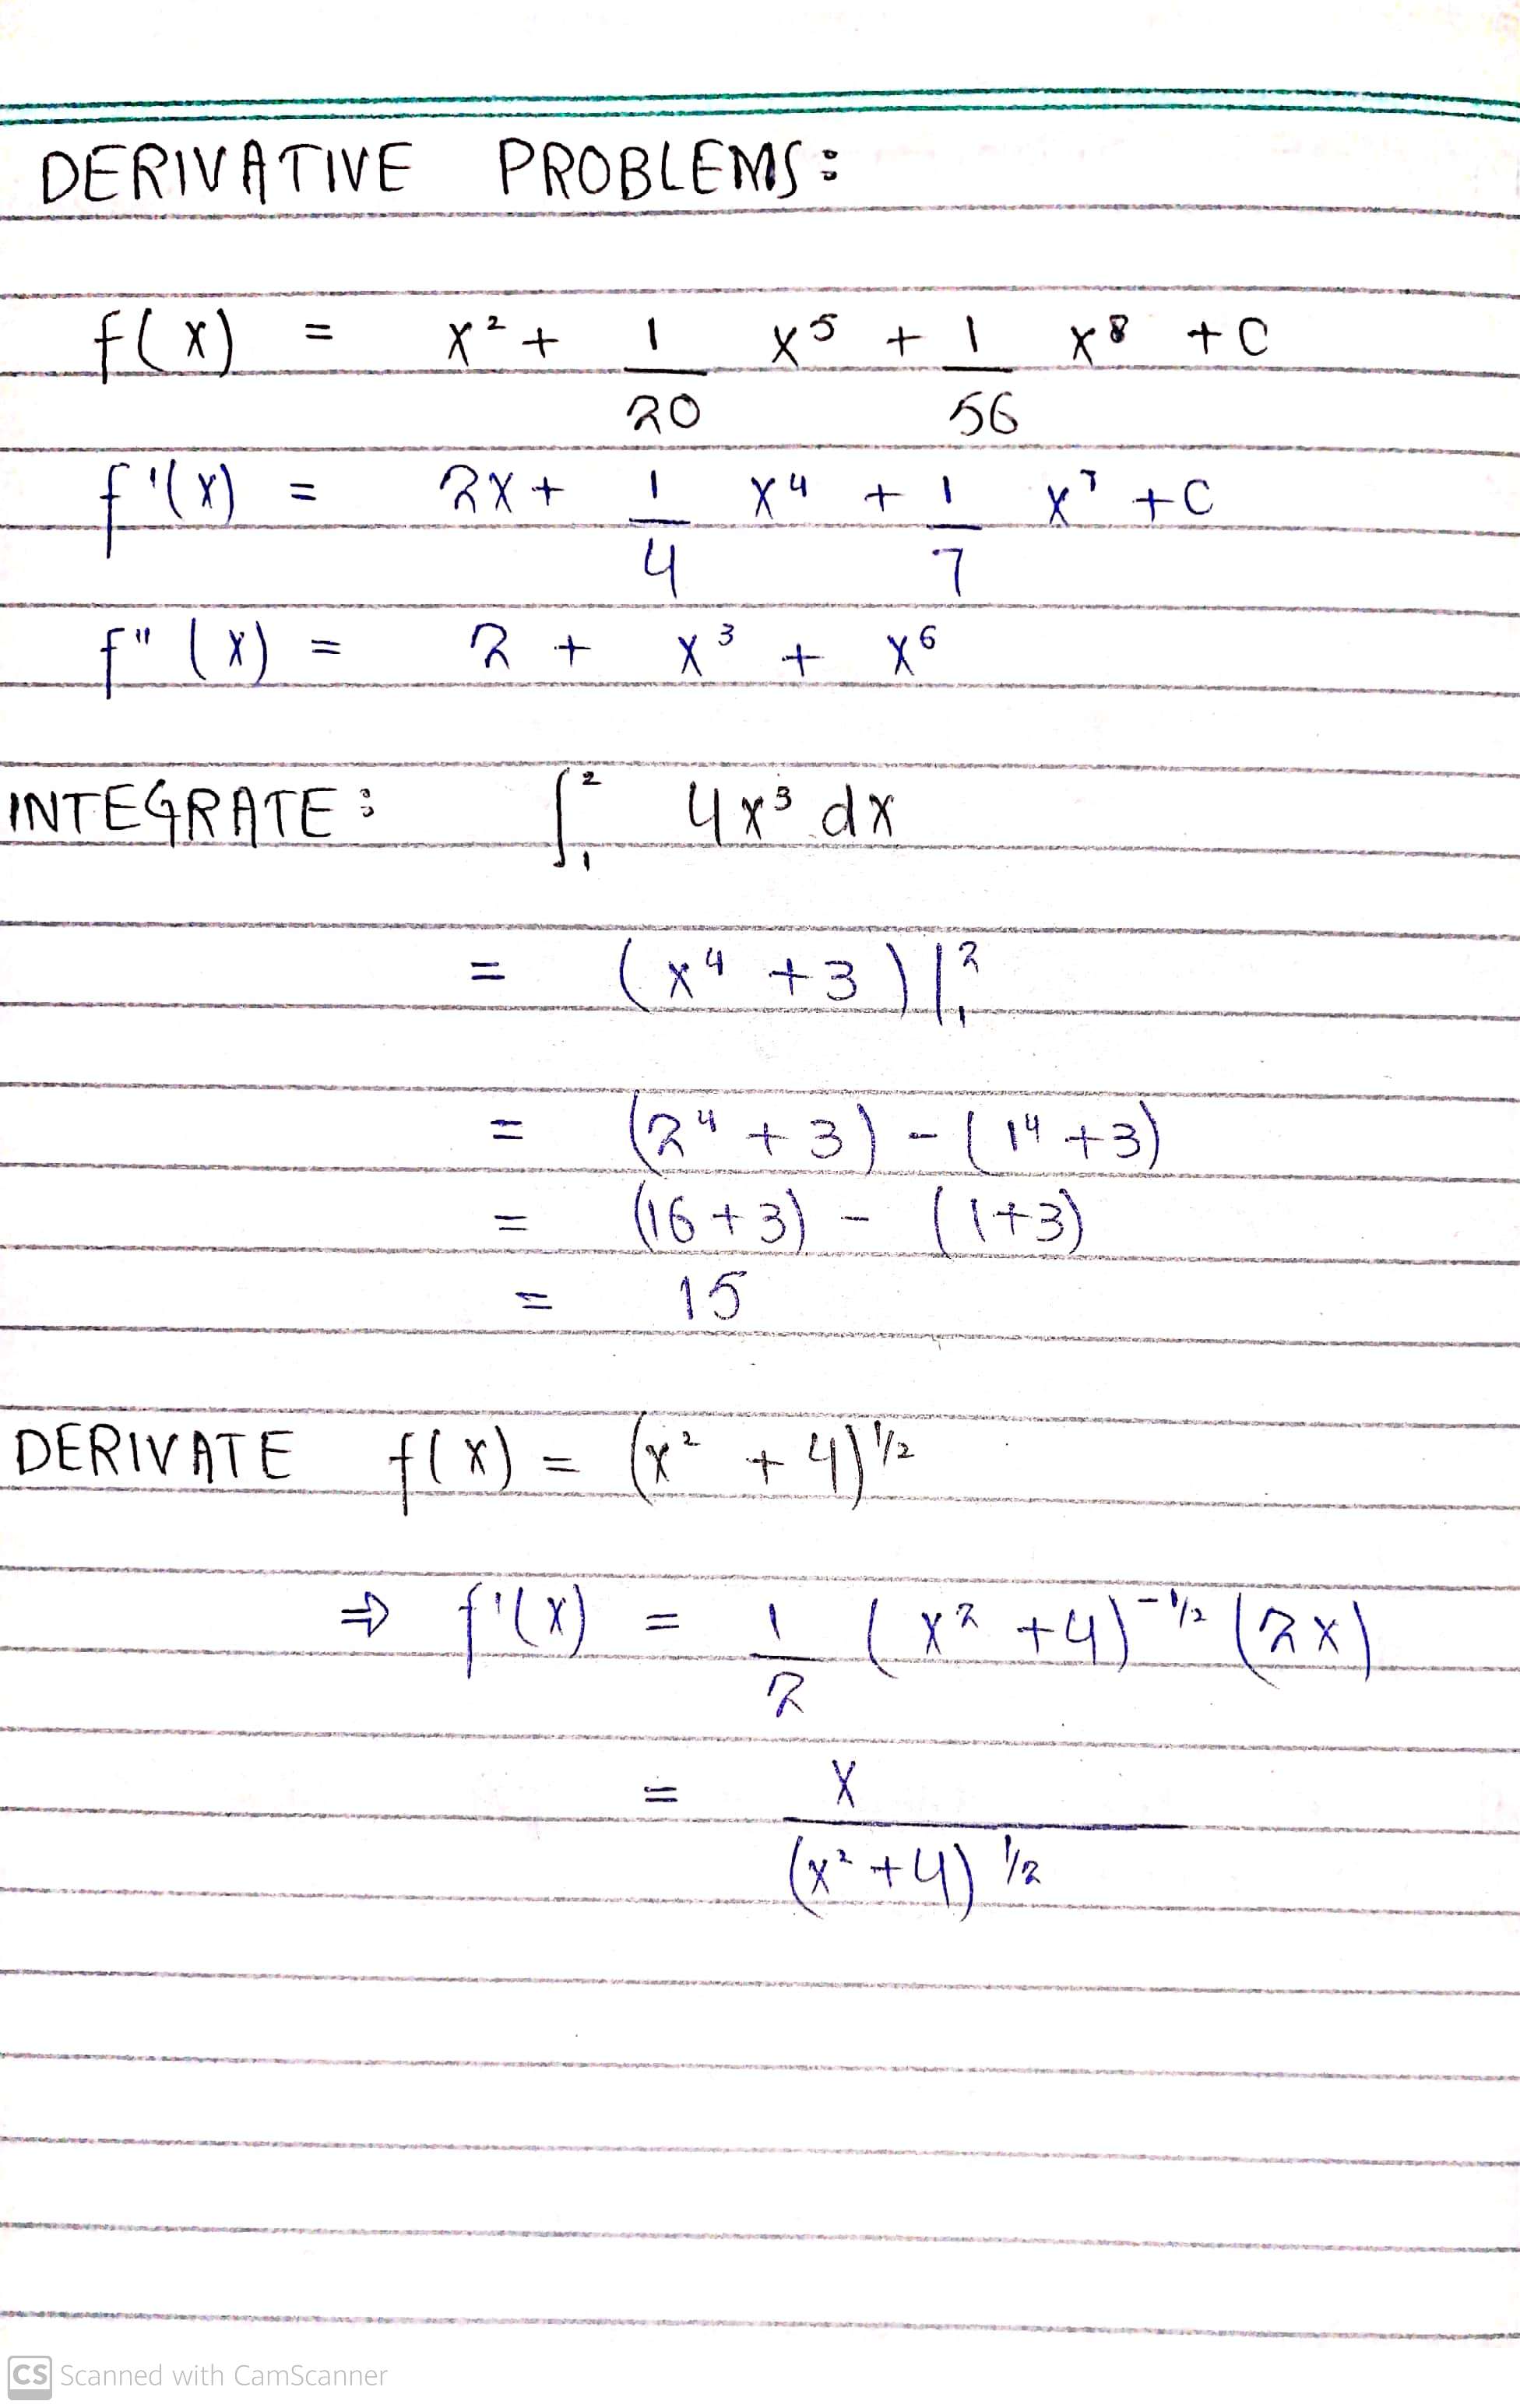 Help You In Calculus Linear Algebra Or Math Problems By Aieesubhan001